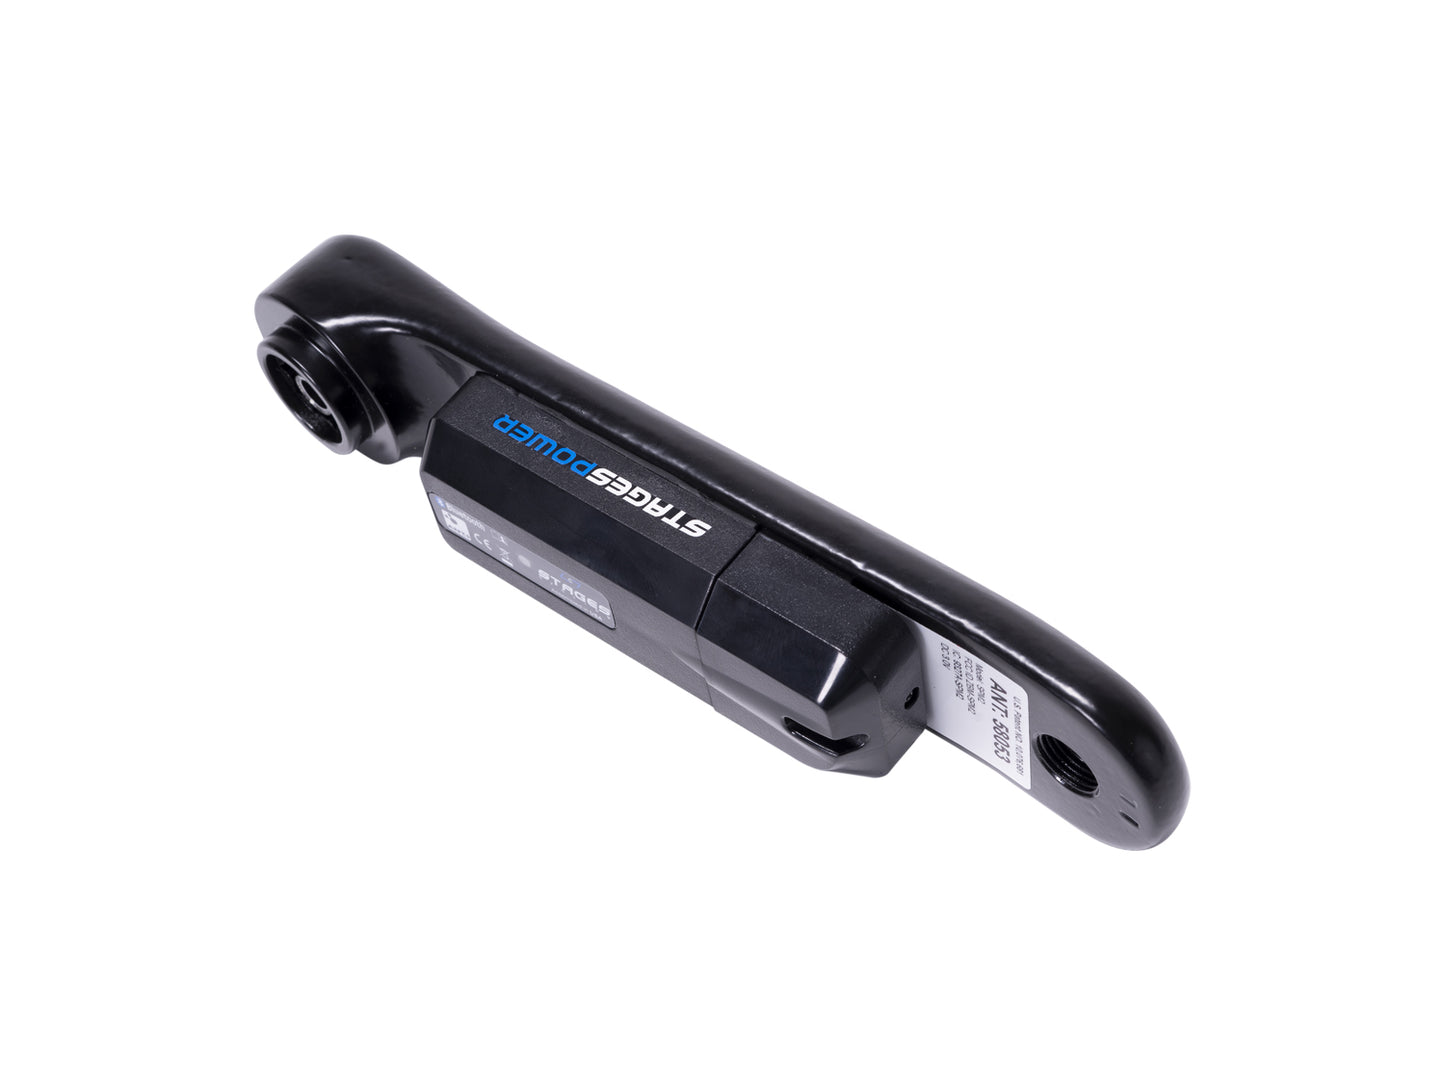 Stages power Meter for SC series indoor bikes